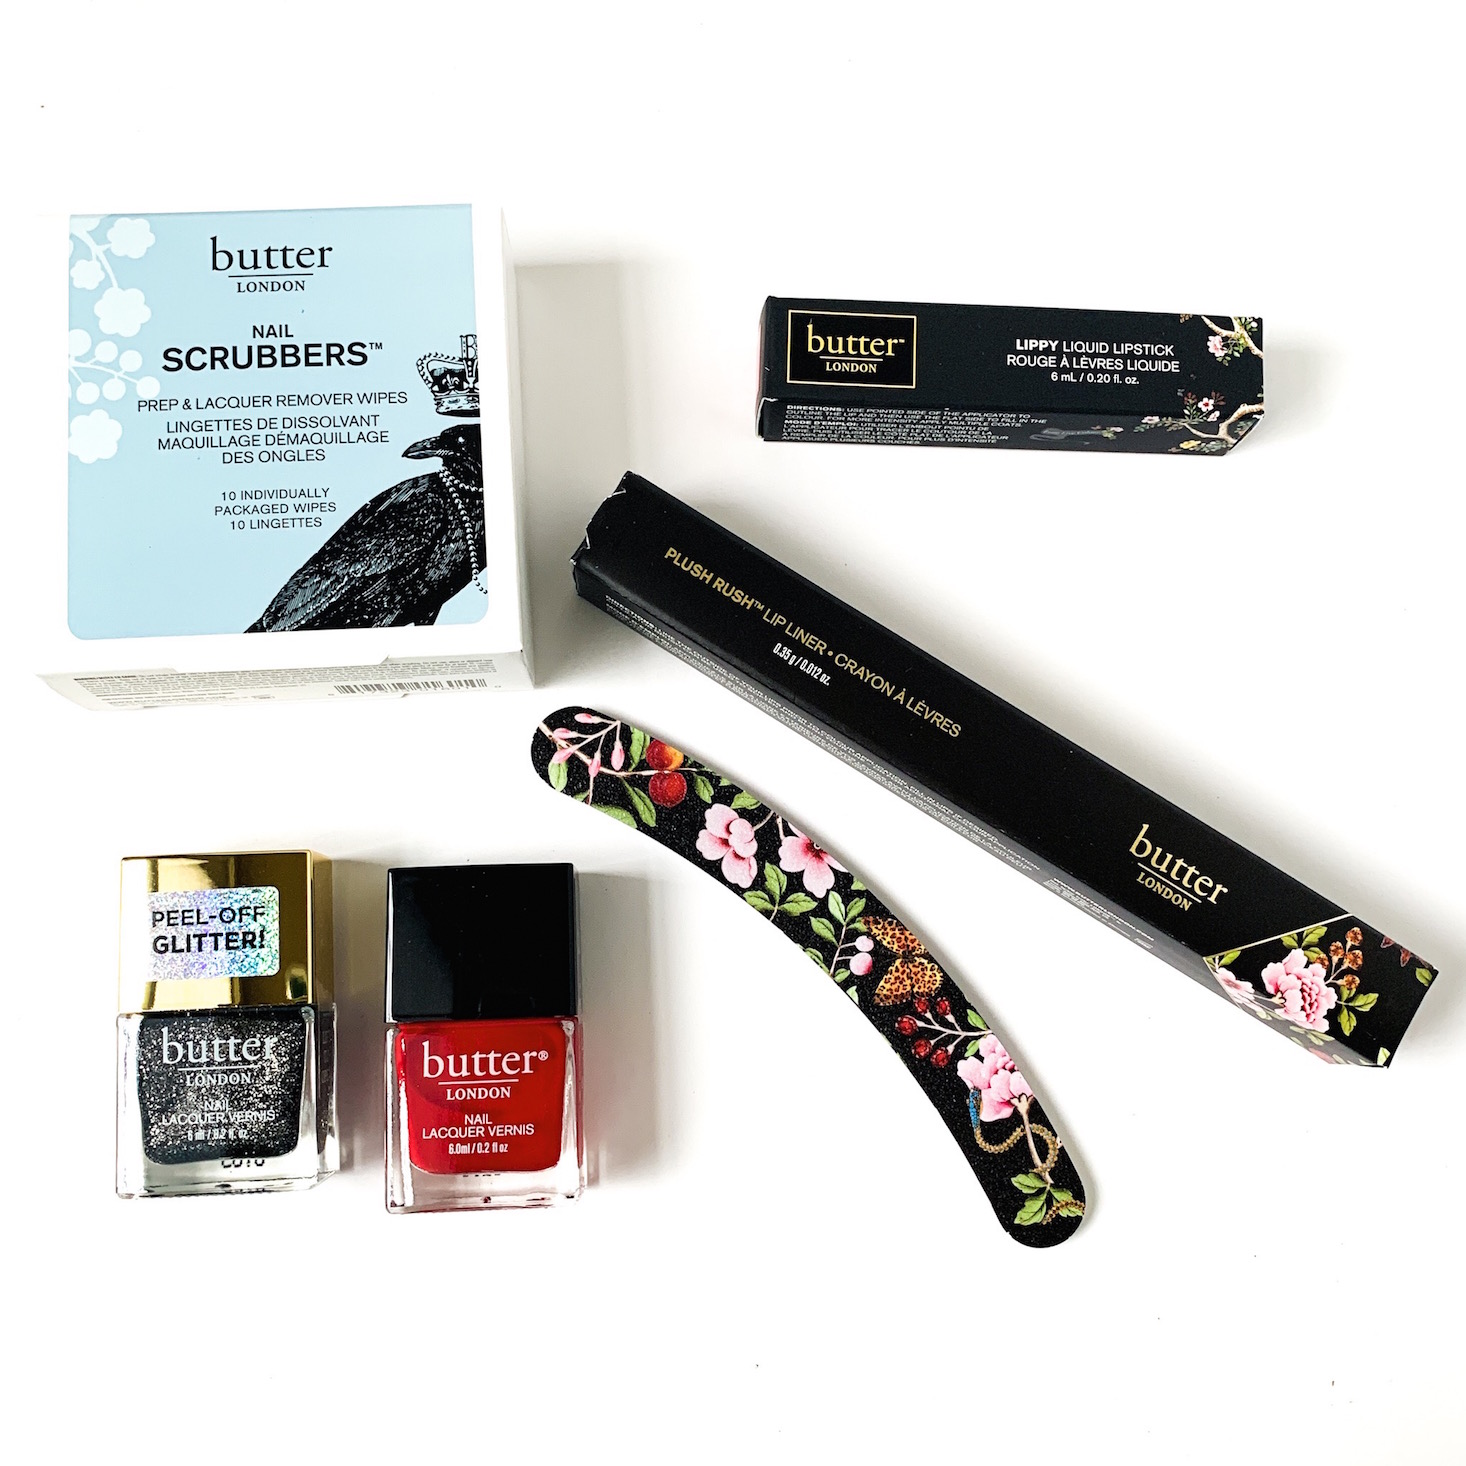 Butter London Valentine’s Day Mystery Bundle Review – February 2019